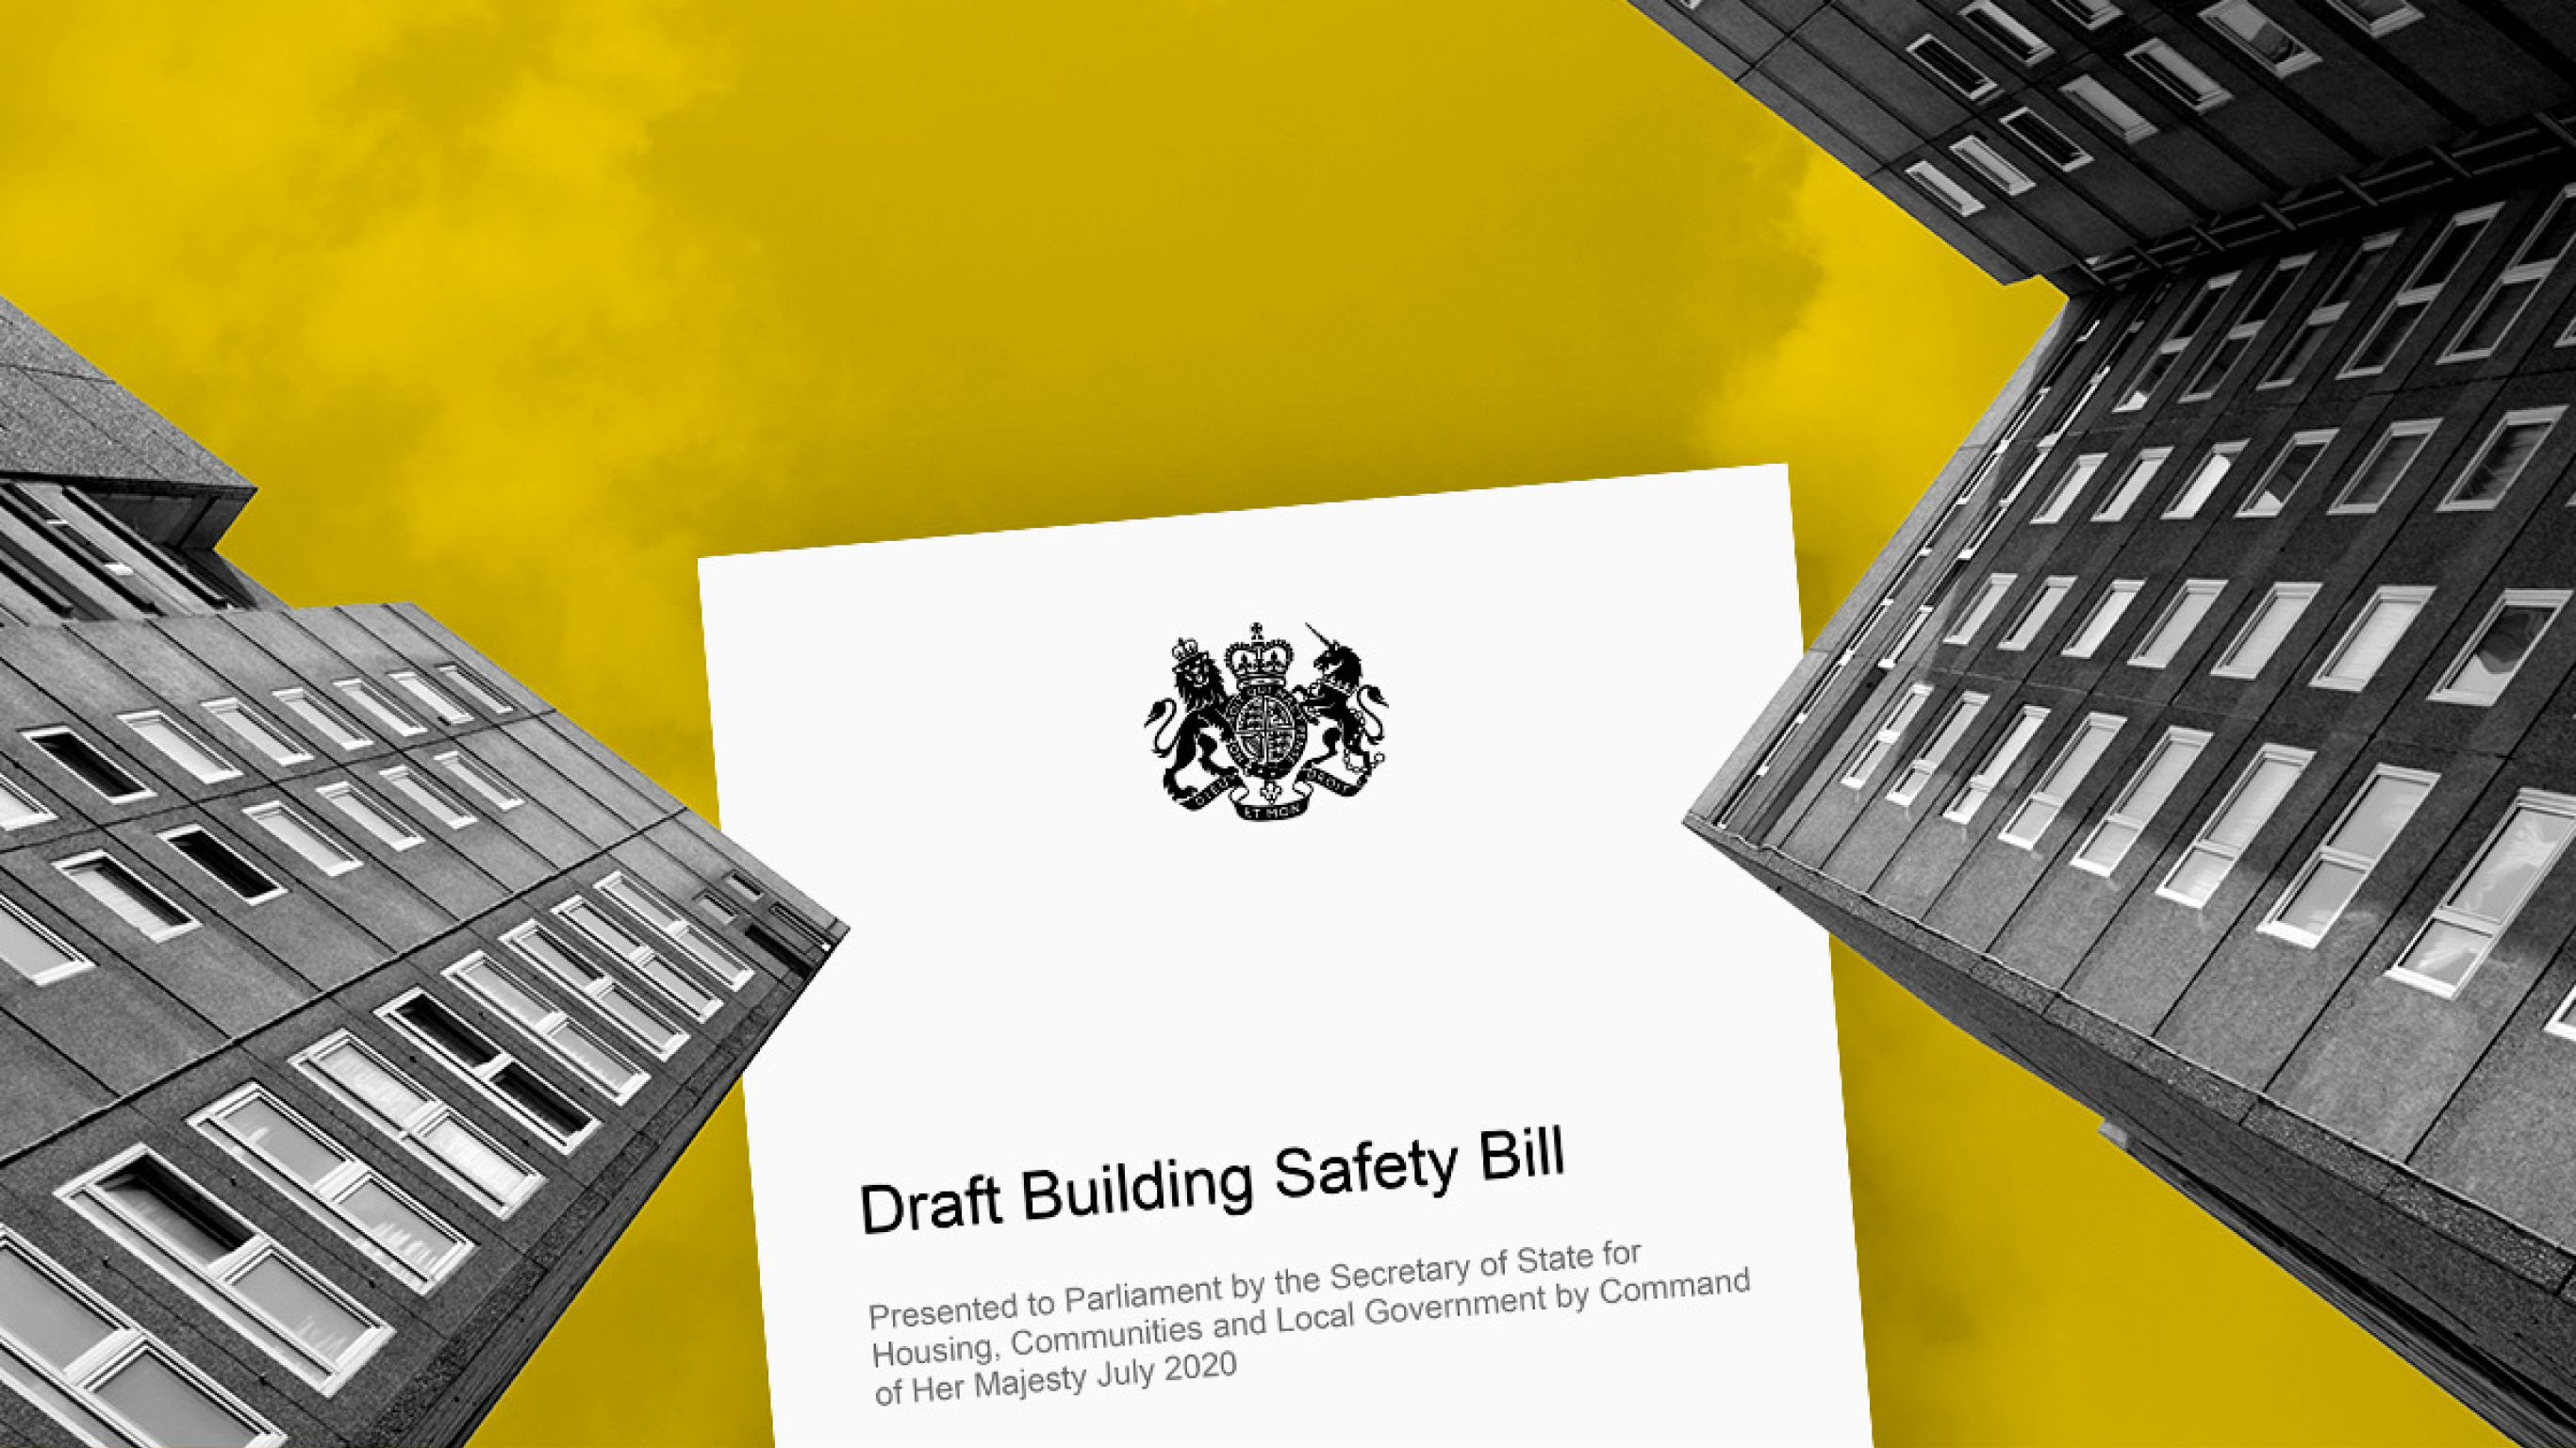 The Building Safety Bill